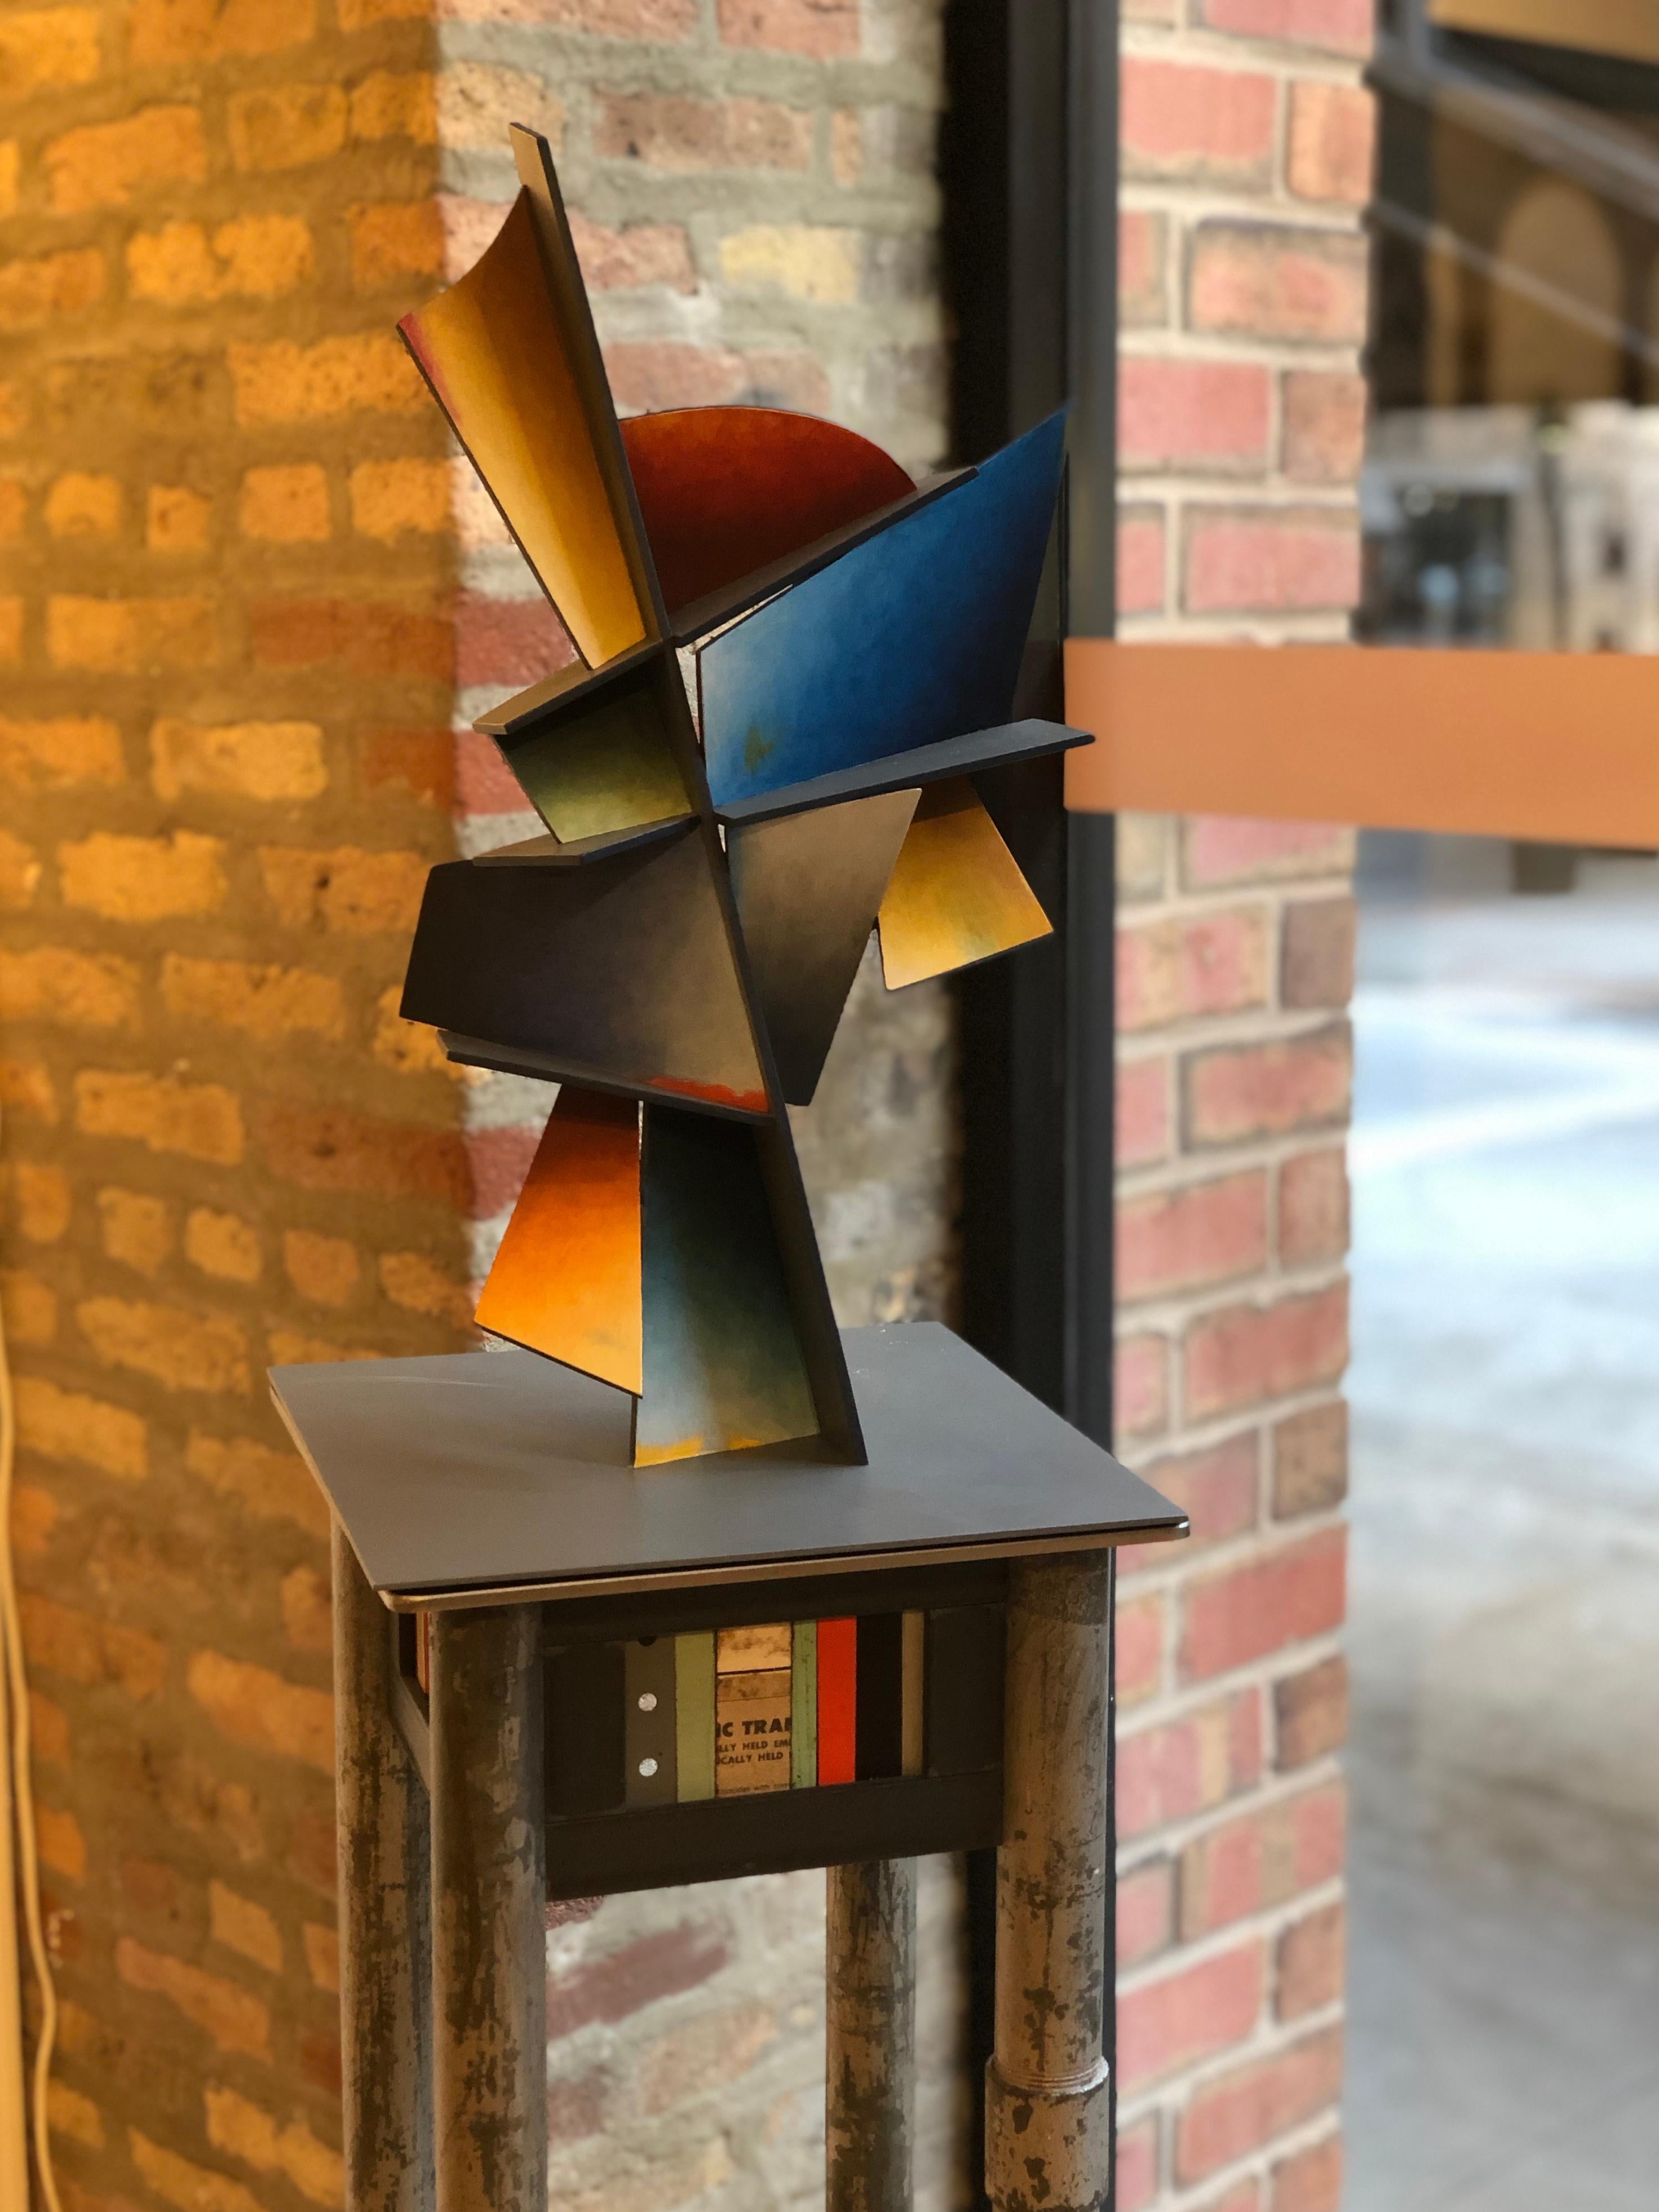 This dynamic table sized sculpture is created from sheets of steel welded together in an abstract geometric pattern bright blue, orange, purple and yellow dominate and are balanced by softer hues.

Chris Hill
HIdden Hour
steel
20.50h x 12w x 12d